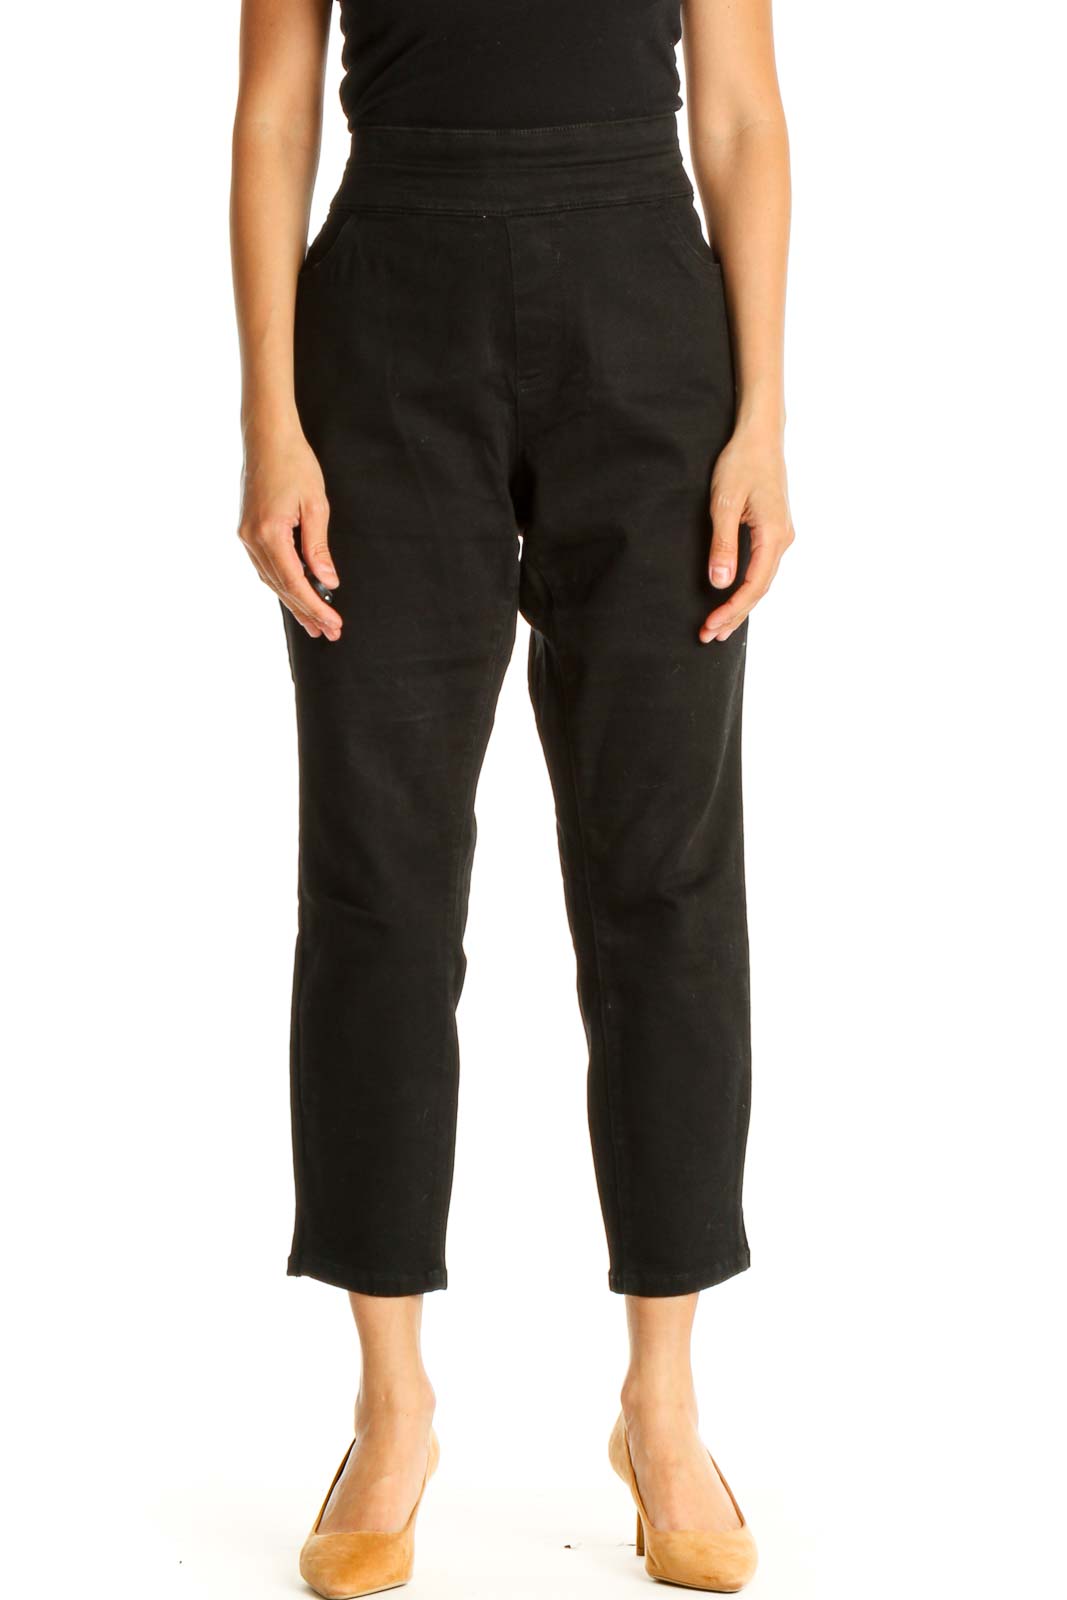 Black Solid All Day Wear Capri Pants Front